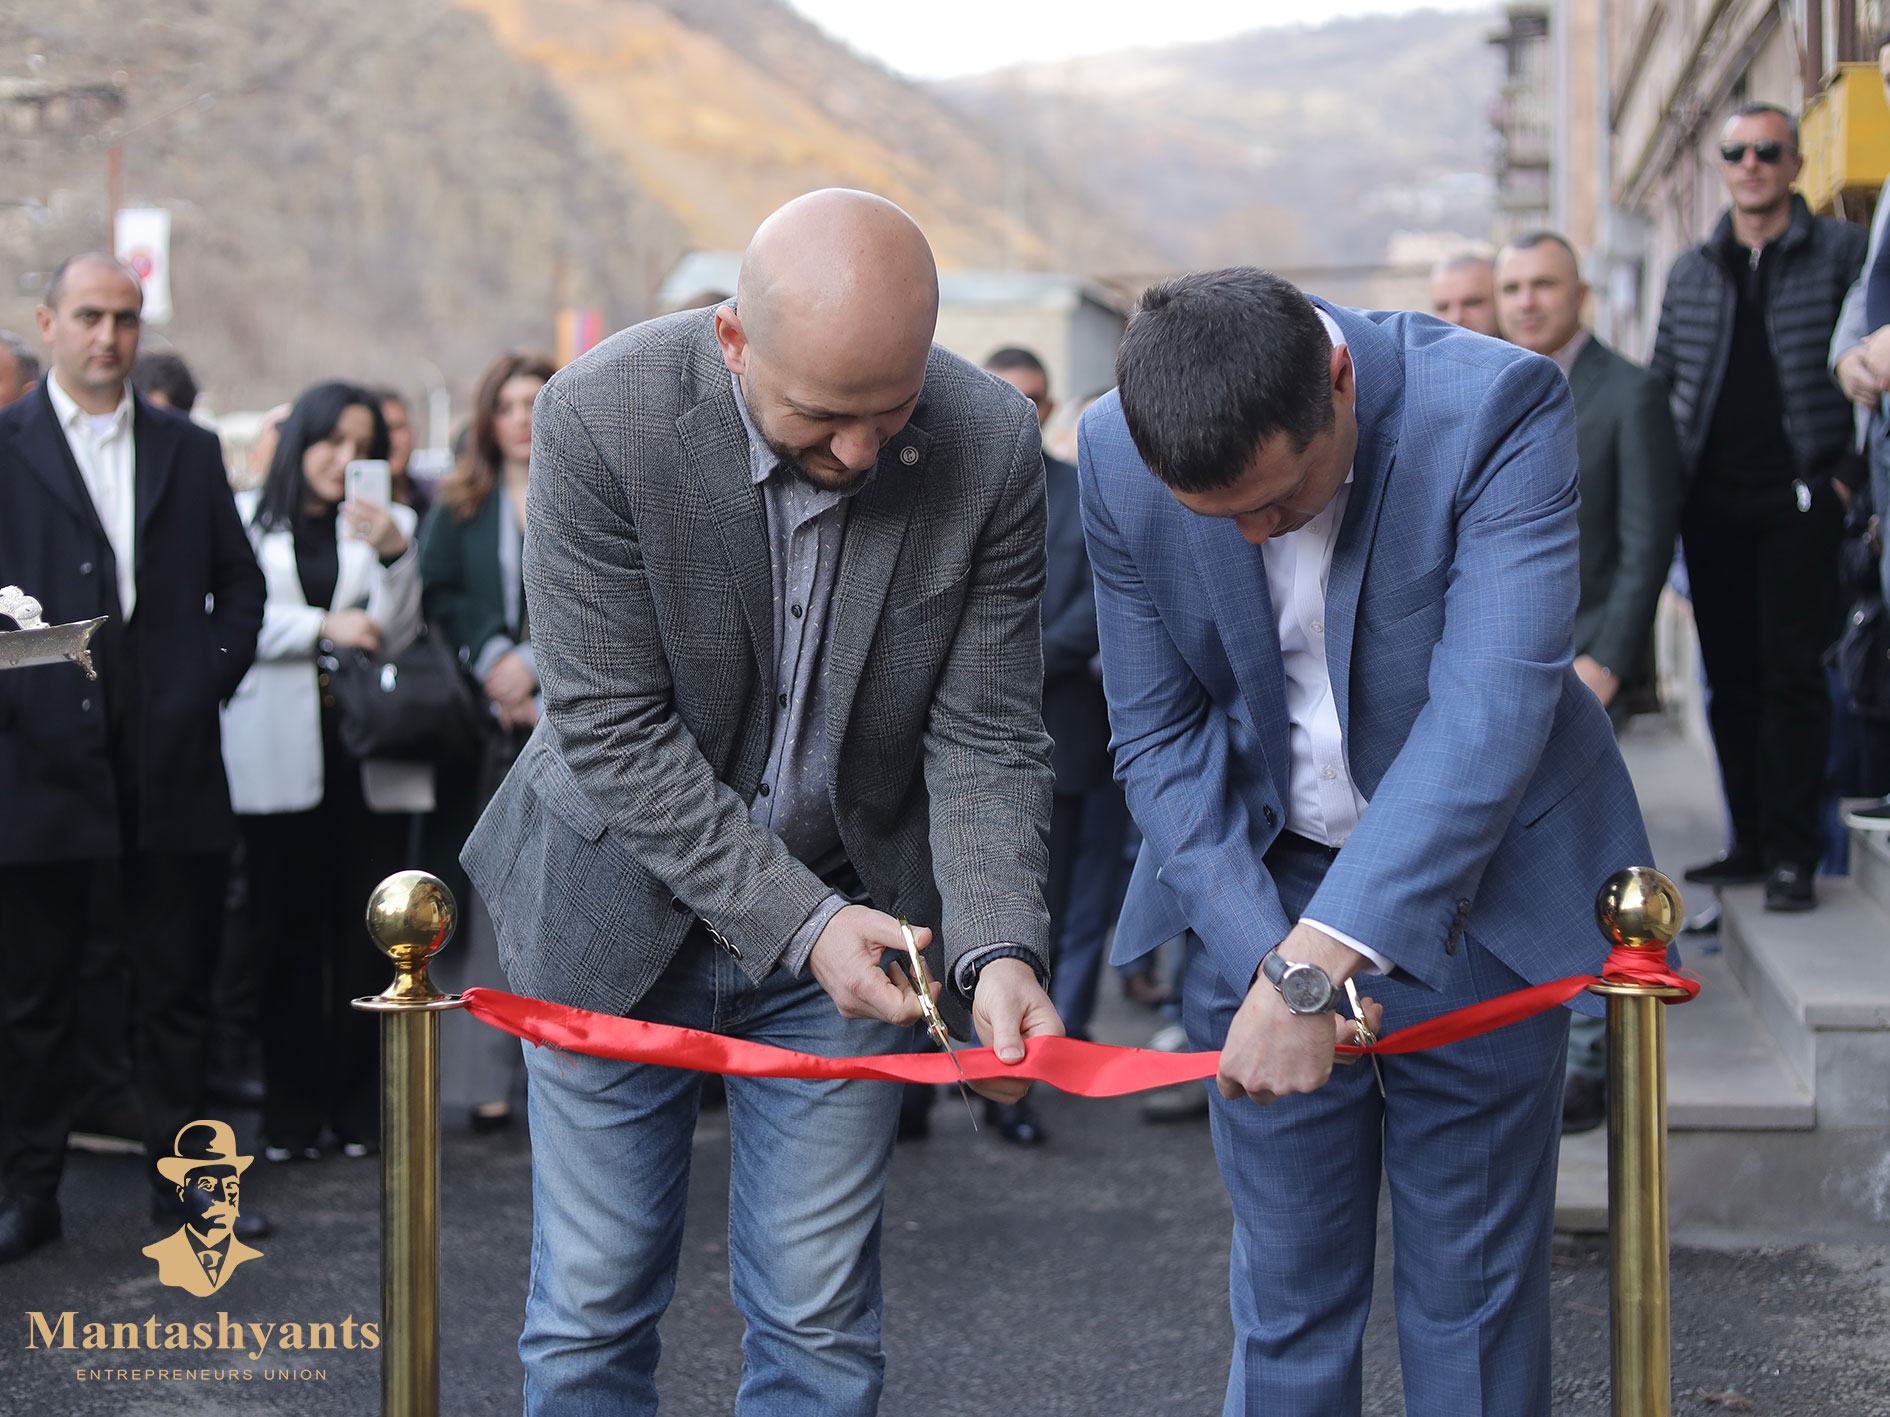 The 15th branch of the Mantashyants Union of Entrepreneurs has opened in Kapan